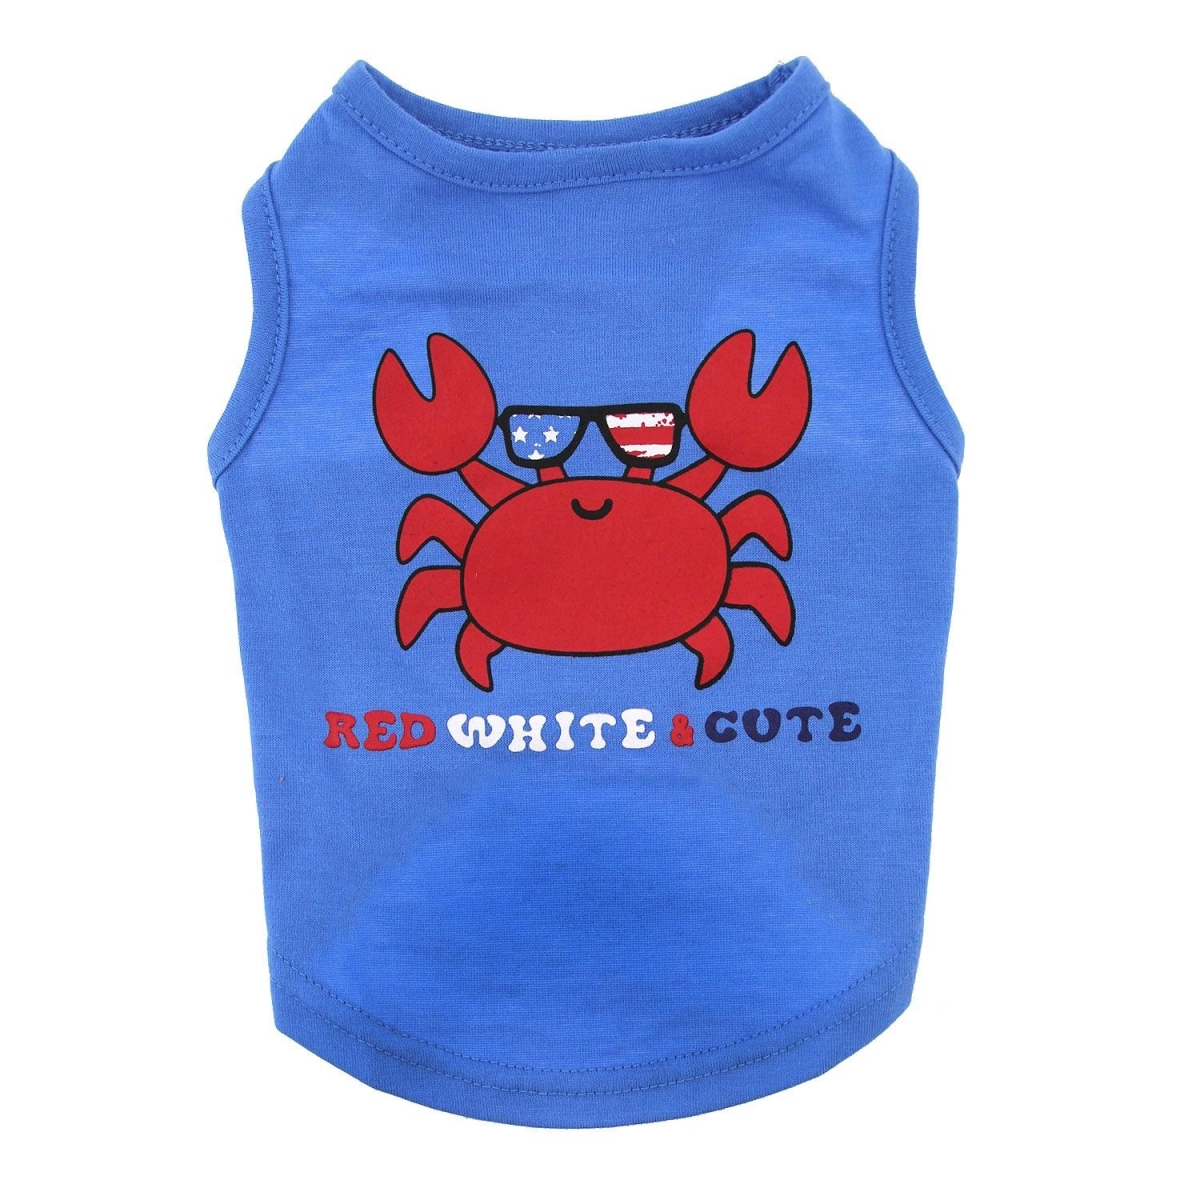 Zack & Zoey Red, White, N Cute Upf 40 Dog Tank - Large, Blue